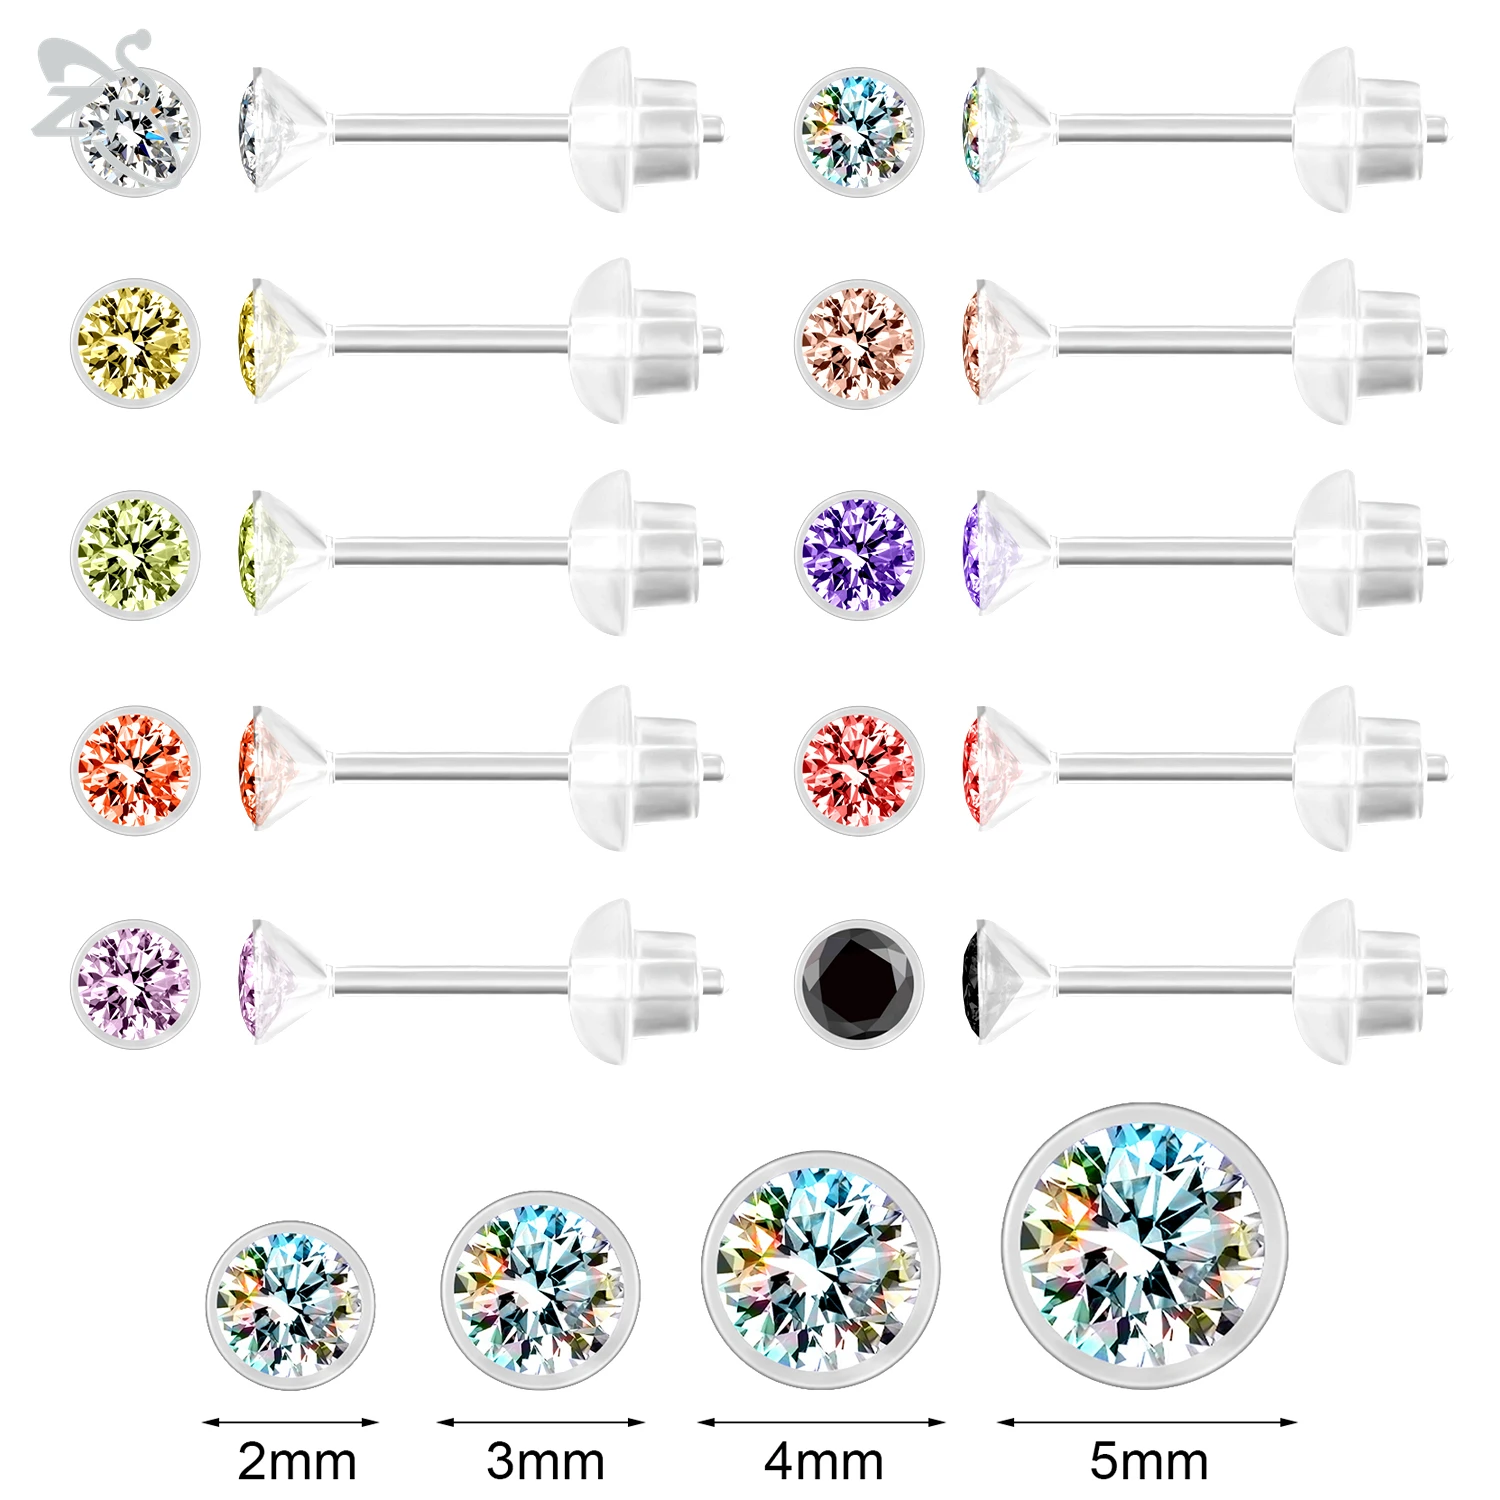 

ZS 4-10 Pairs/lot Round Colorful CZ Crystal Stud Earring 20G Anti-allergy Acrylic Earrings Cartilage Helix Conch Piercings 2-5MM